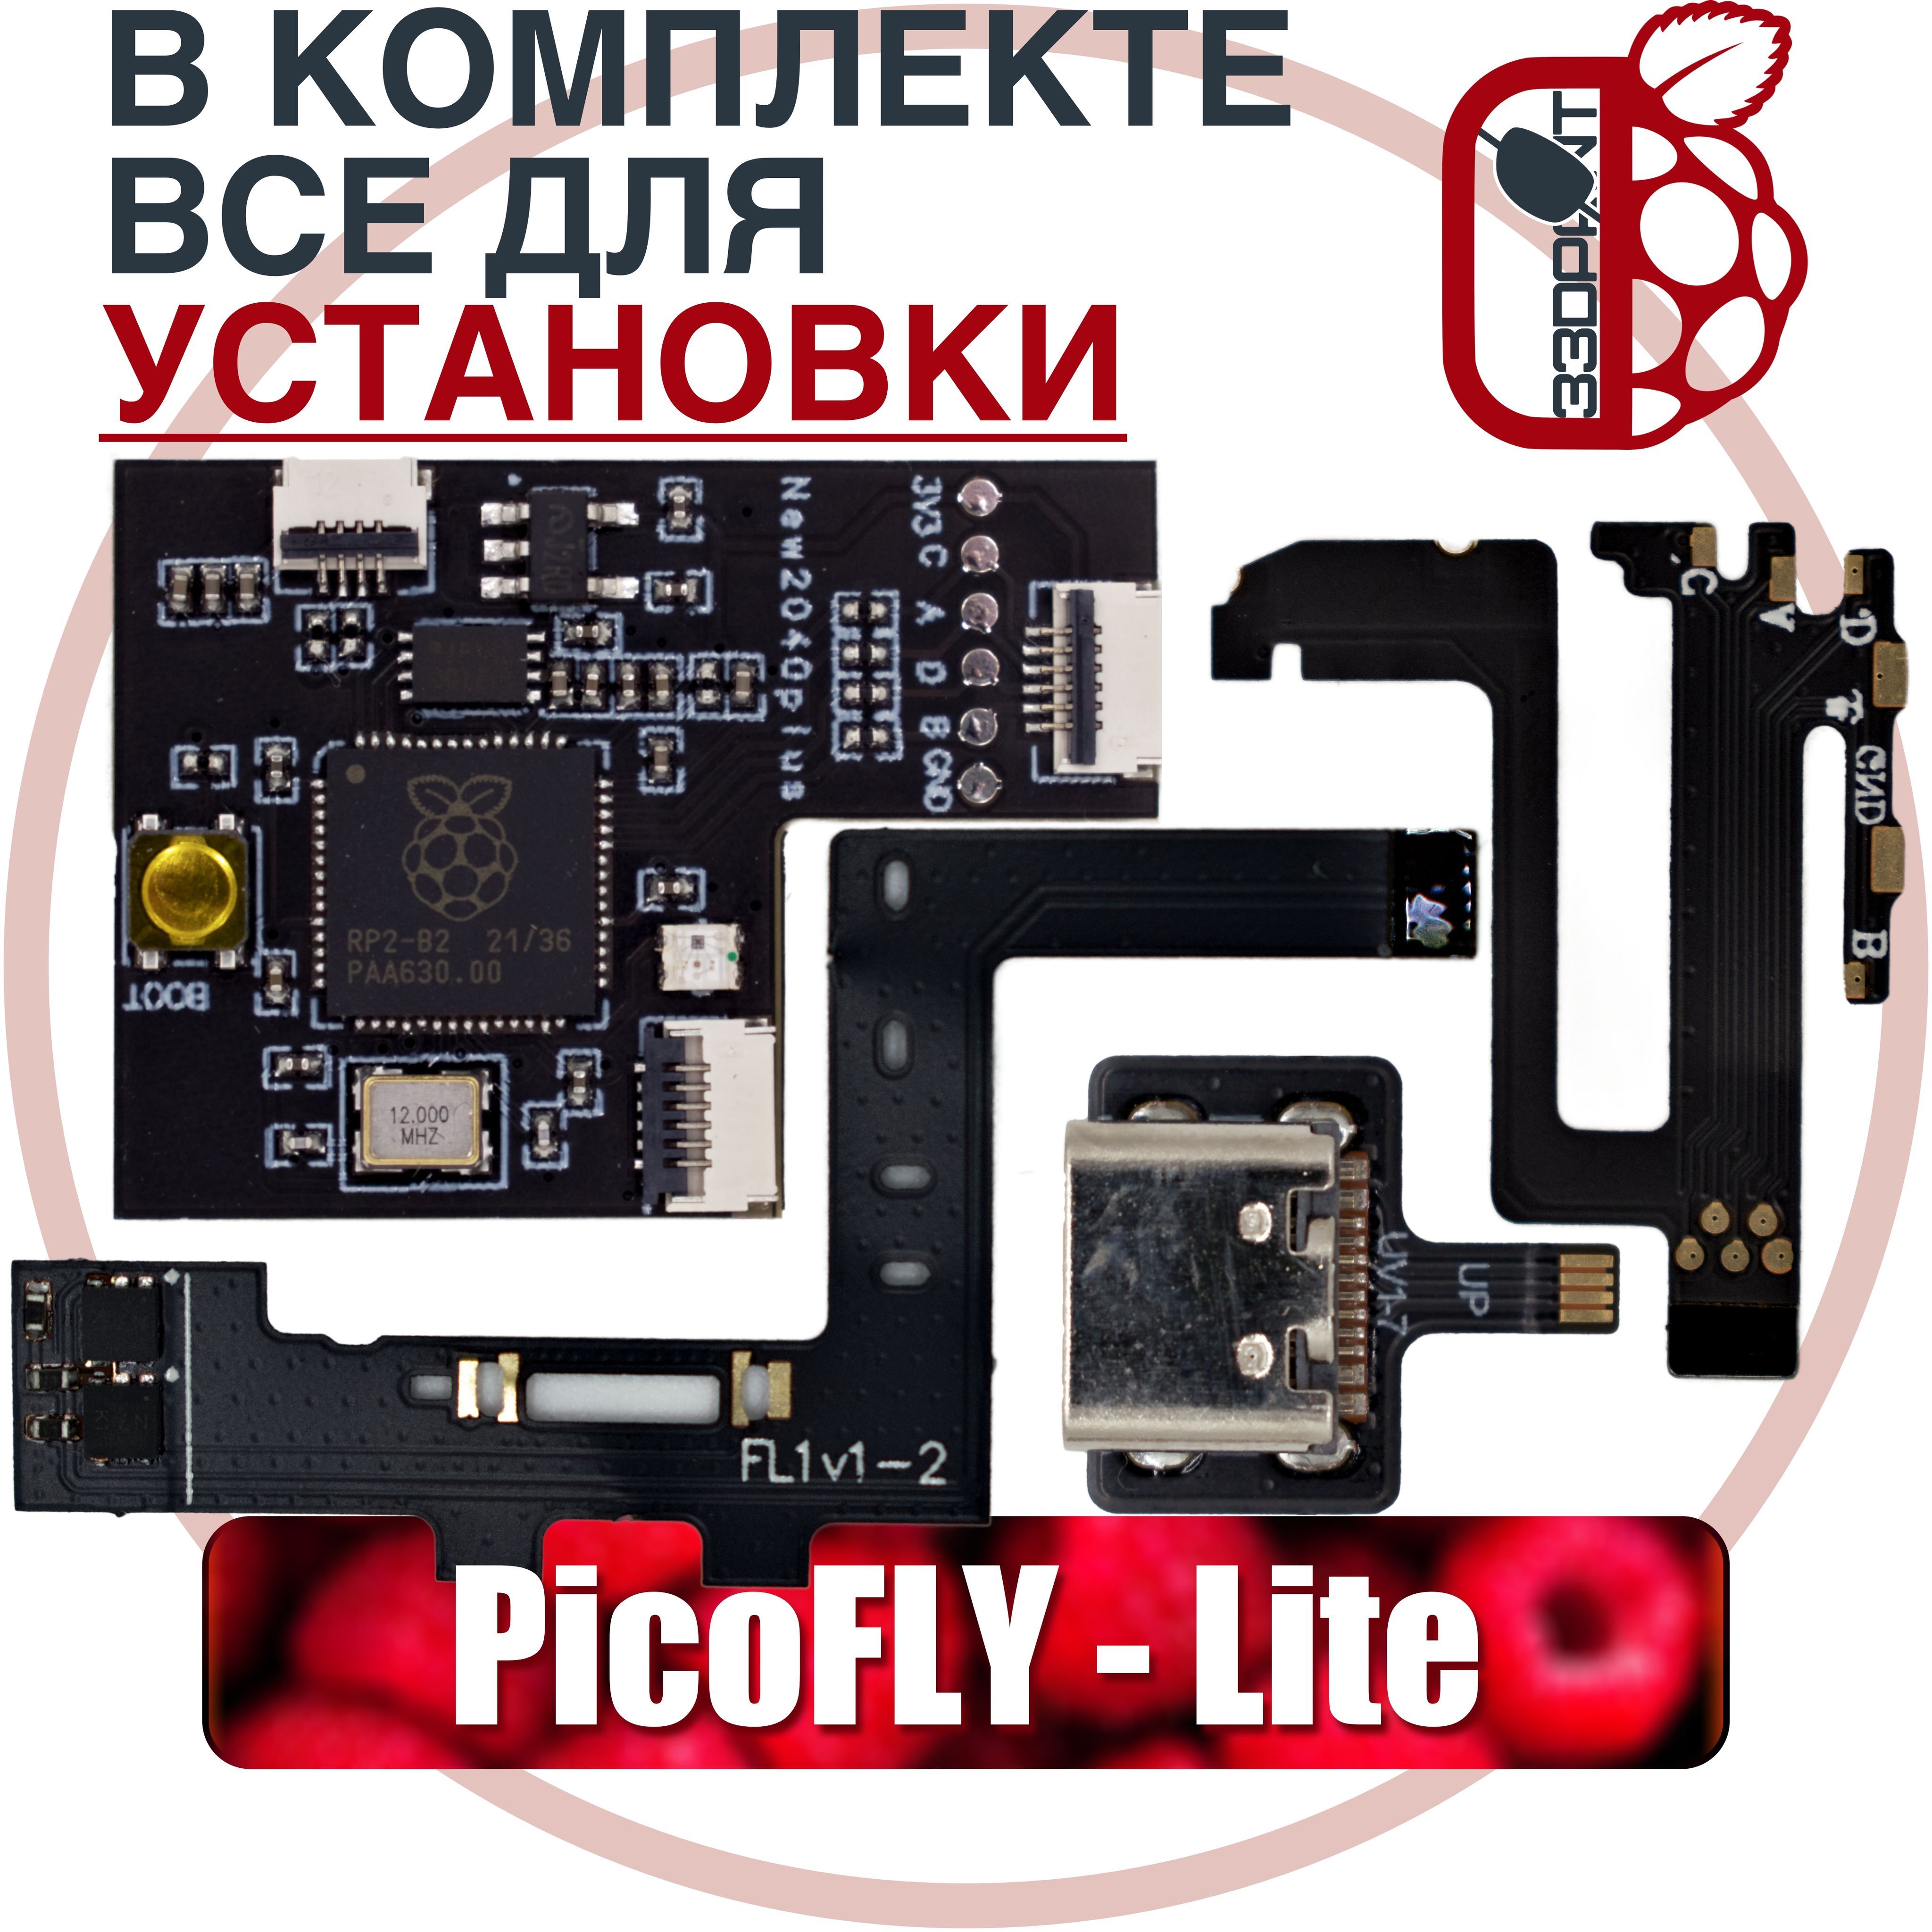 Picofly nintendo switch. Picofly rp2040. HWFLY rp2040 Lite. Picofly Switch. Picofly Nintendo.